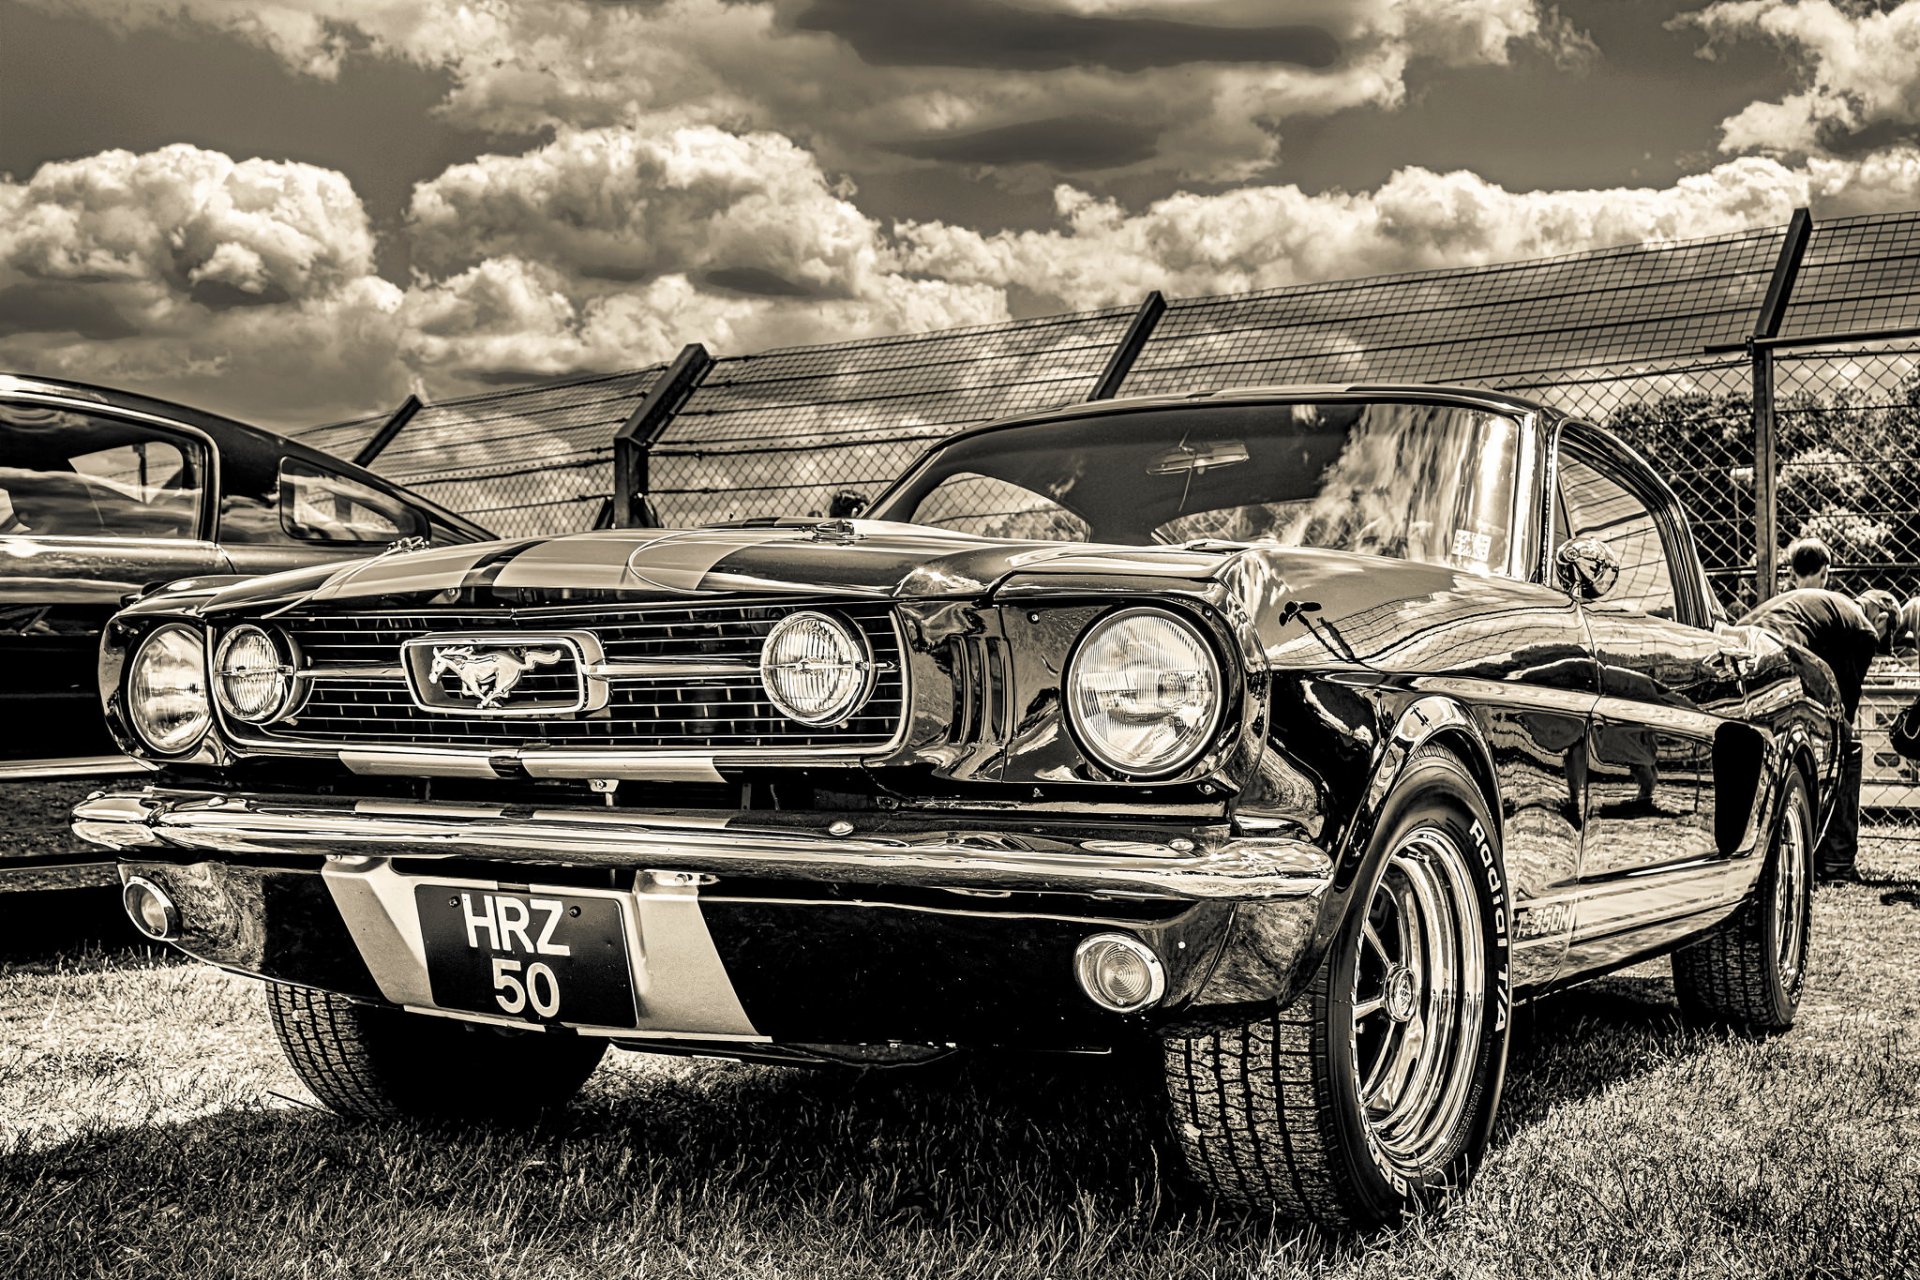 Car poster. Ford Mustang 1965. Ретро Форд Мустанг 1965. Форд Мустанг Shelby 1965. Форд Мустанг 1960.